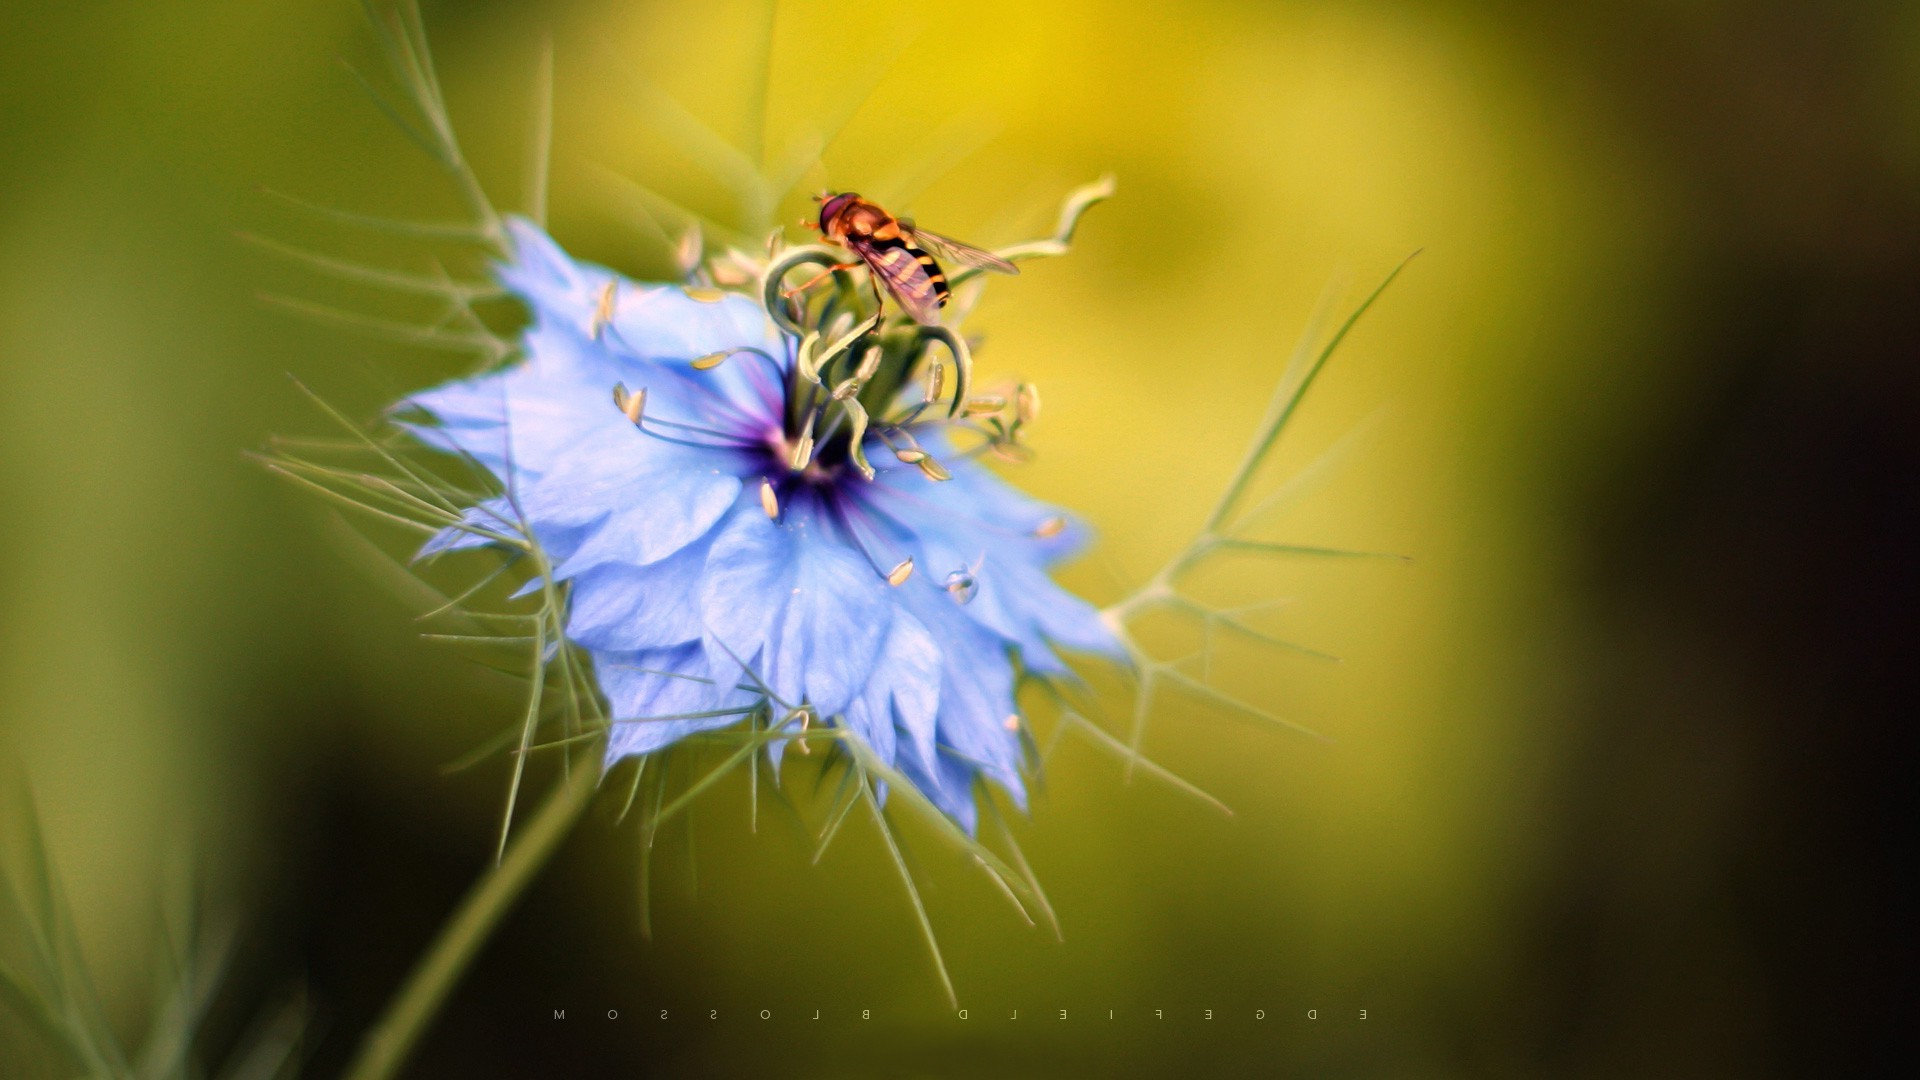 flowers, Insect, Bees, Macro, Blue Flowers Wallpaper